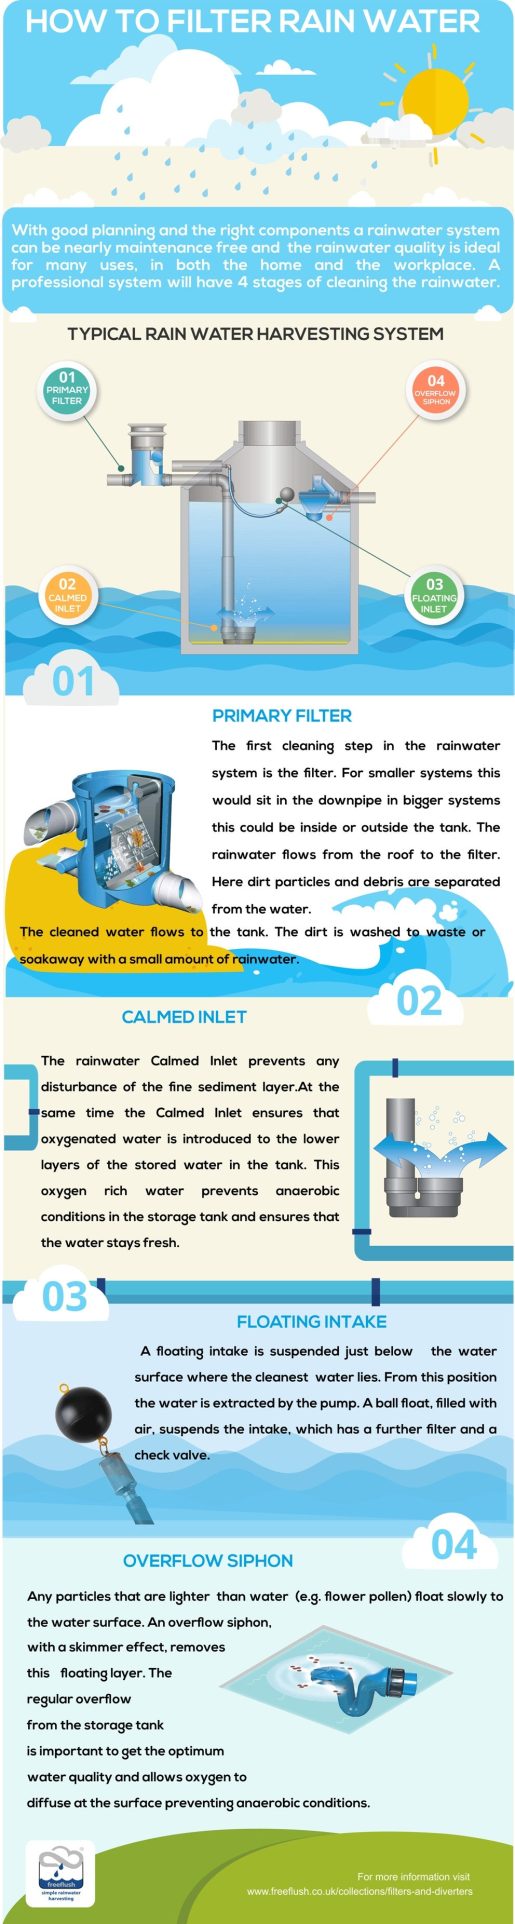 How to Filter Rainwater for Rainwater Harvesting Systems?